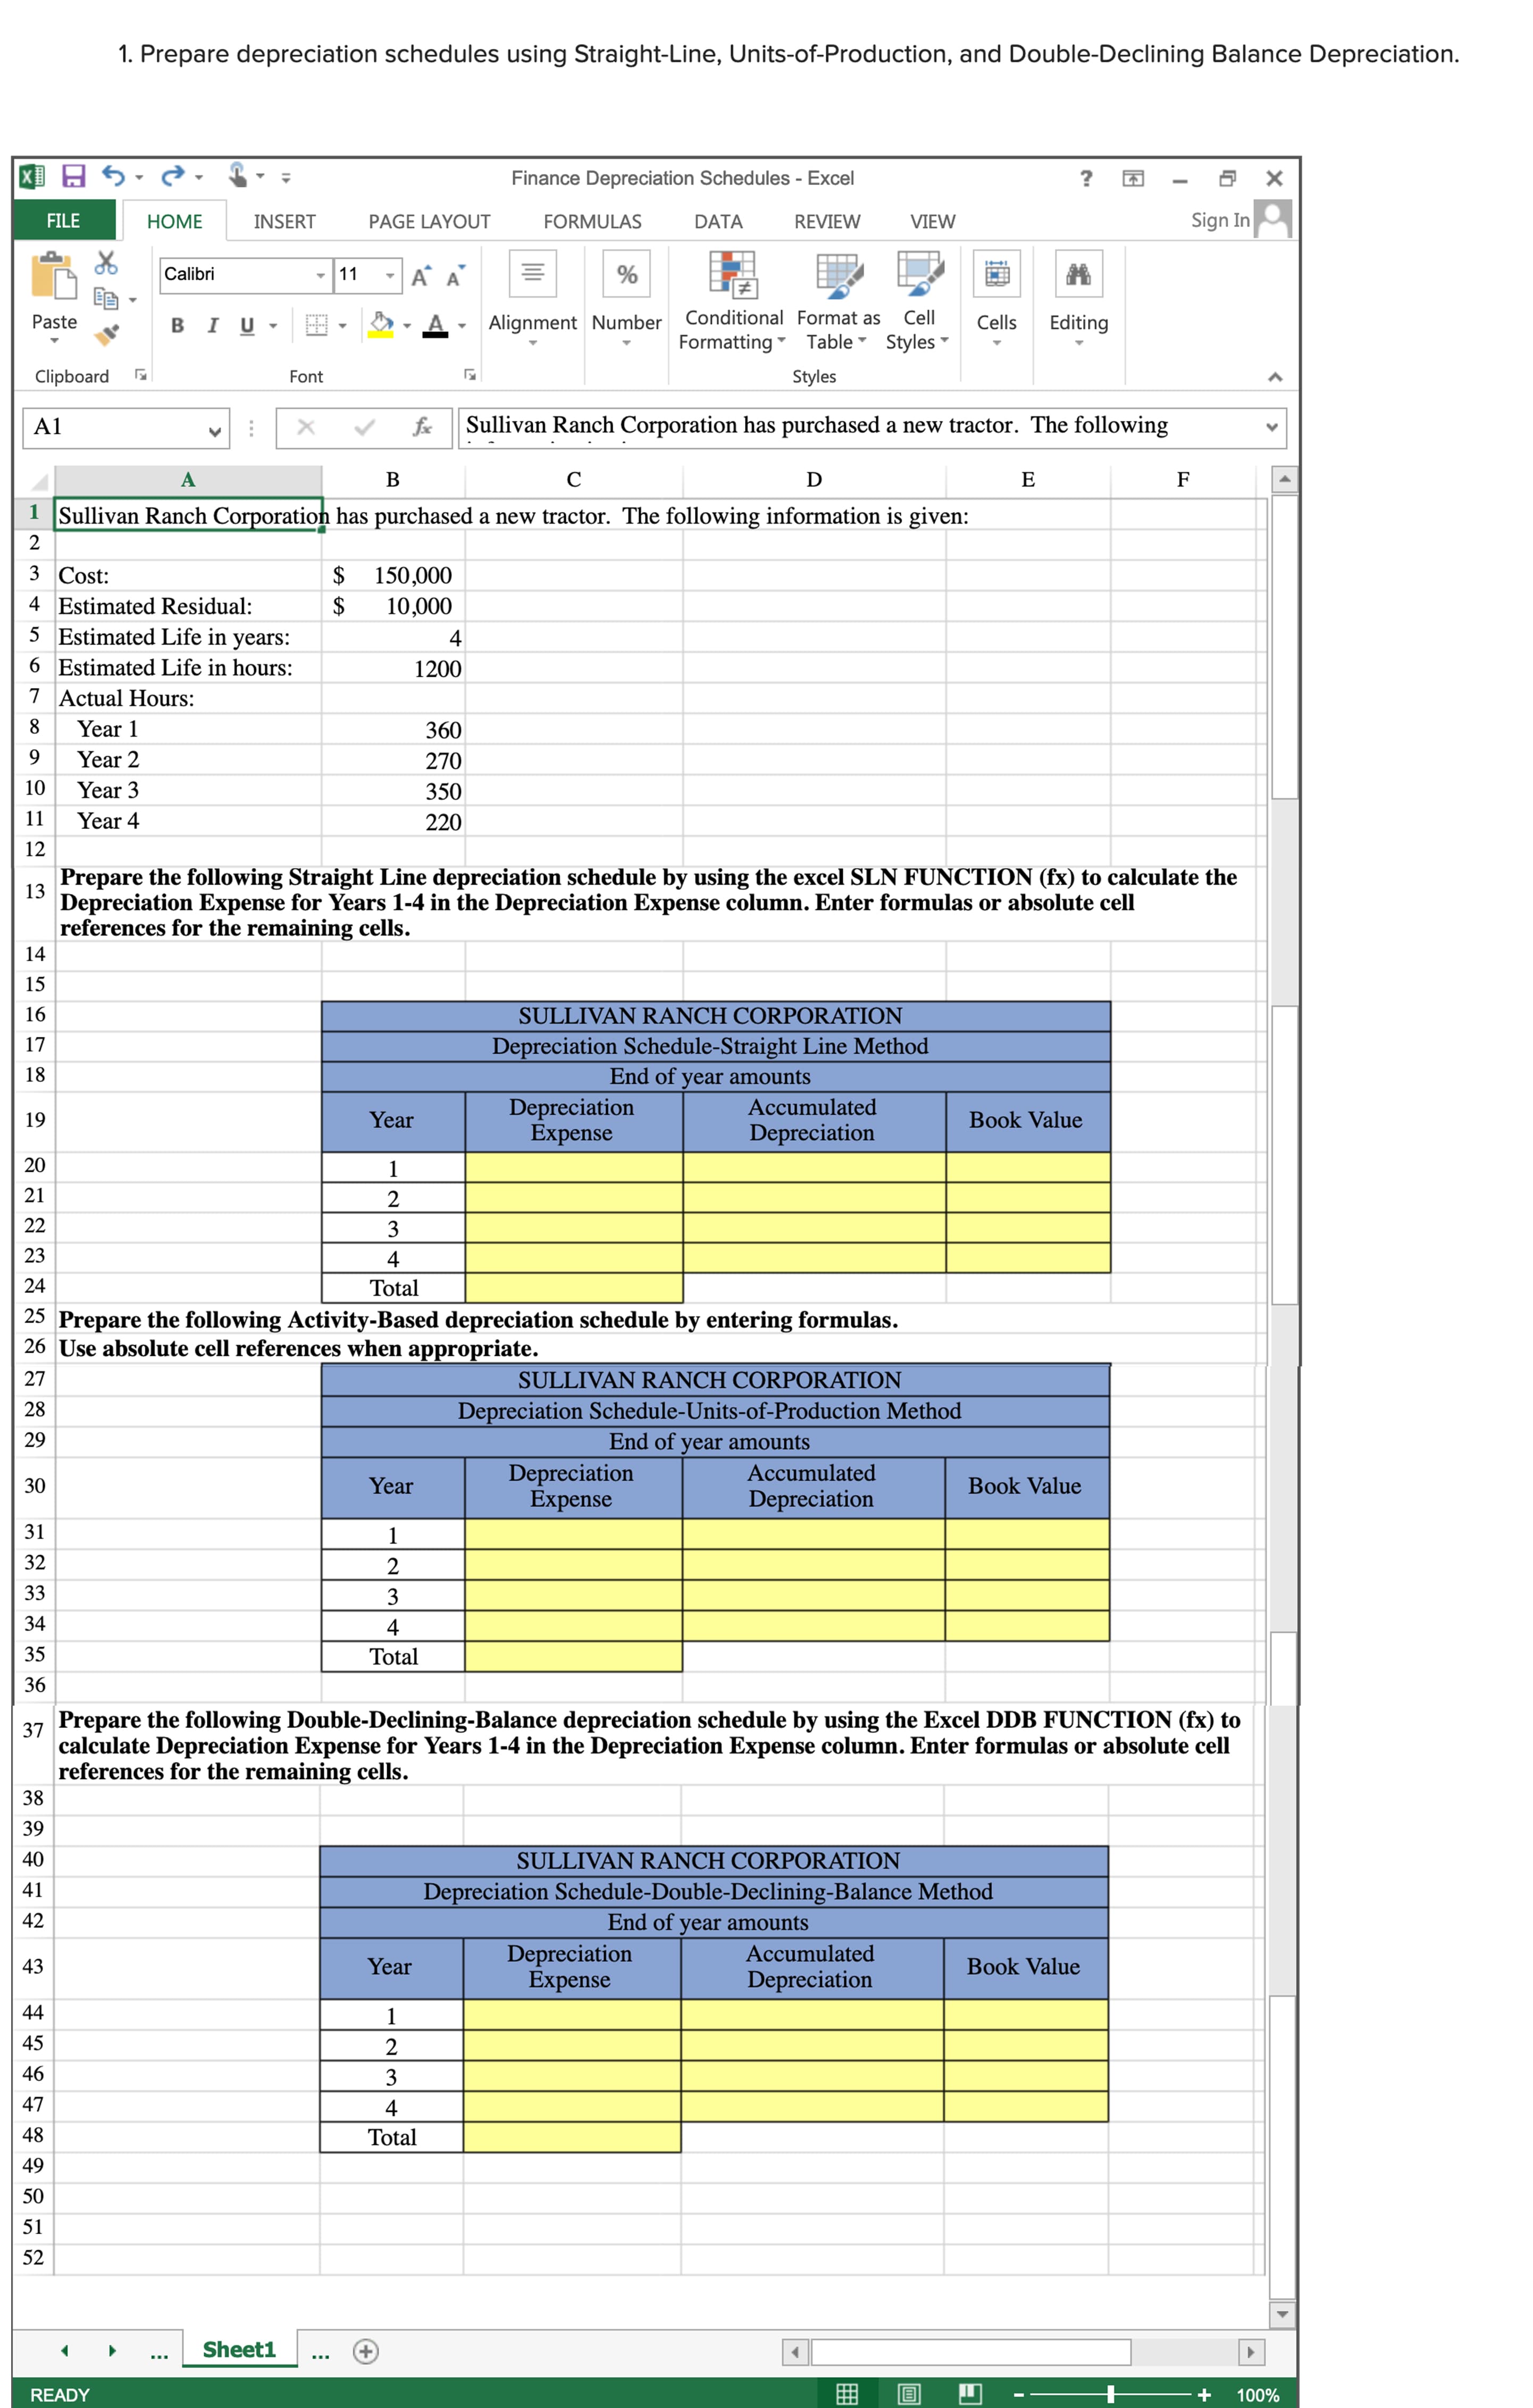 1. Prepare depreciation schedules using Straight-Line, Units-of-Production, and Double-Declining Balance Depreciation.
Finance Depreciation Schedules - Excel
Sign In
FILE
НOМE
INSERT
PAGE LAYOUT
FORMULAS
DATA
REVIEW
VIEW
Calibri
-11
Alignment Number Conditional Format as Cell
Formatting Table Styles -
Paste
в I U
A.
Cells
Editing
Clipboard
Font
Styles
A1
fx
Sullivan Ranch Corporation has purchased a new tractor. The following
A
D
F
1 Sullivan Ranch Corporation has purchased a new tractor. The following information is given:
2
$ 150,000
10,000
3 Cost:
4 Estimated Residual:
5 Estimated Life in years:
4
6 Estimated Life in hours:
1200
7 Actual Hours:
Year 1
360
9.
Year 2
270
10
Year 3
350
11
Year 4
220
12
Prepare the following Straight Line depreciation schedule by using the excel SLN FUNCTION (fx) to calculate the
13
Depreciation Expense for Years 1-4 in the Depreciation Expense column. Enter formulas or absolute cell
references for the remaining cells.
14
15
16
SULLIVAN RANCH CORPORATION
17
Depreciation Schedule-Straight Line Method
18
End of
year amounts
Depreciation
Expense
Accumulated
19
Year
Book Value
Depreciation
20
21
2
22
3
23
4
24
Total
25 Prepare the following Activity-Based depreciation schedule by entering formulas.
26 Use absolute cell references when appropriate.
27
SULLIVAN RANCH CORPORATION
Depreciation Schedule-Units-of-Production Method
End of year amounts
28
29
Depreciation
Expense
Accumulated
Year
Book Value
Depreciation
31
32
2
33
3
34
4
35
Total
36
Prepare the following Double-Declining-Balance depreciation schedule by using the Excel DDB FUNCTION (fx) to
37
calculate Depreciation Expense for Years 1-4 in the Depreciation Expense column. Enter formulas or absolute cell
references for the remaining cells.
38
39
40
SULLIVAN RANCH CORPORATION
41
Depreciation Schedule-Double-Declining-Balance Method
42
End of
year
amounts
Depreciation
Expense
Accumulated
43
Year
Book Value
Depreciation
44
45
2
46
3
47
4
48
Total
49
50
51
52
Sheet1
READY
100%
30
